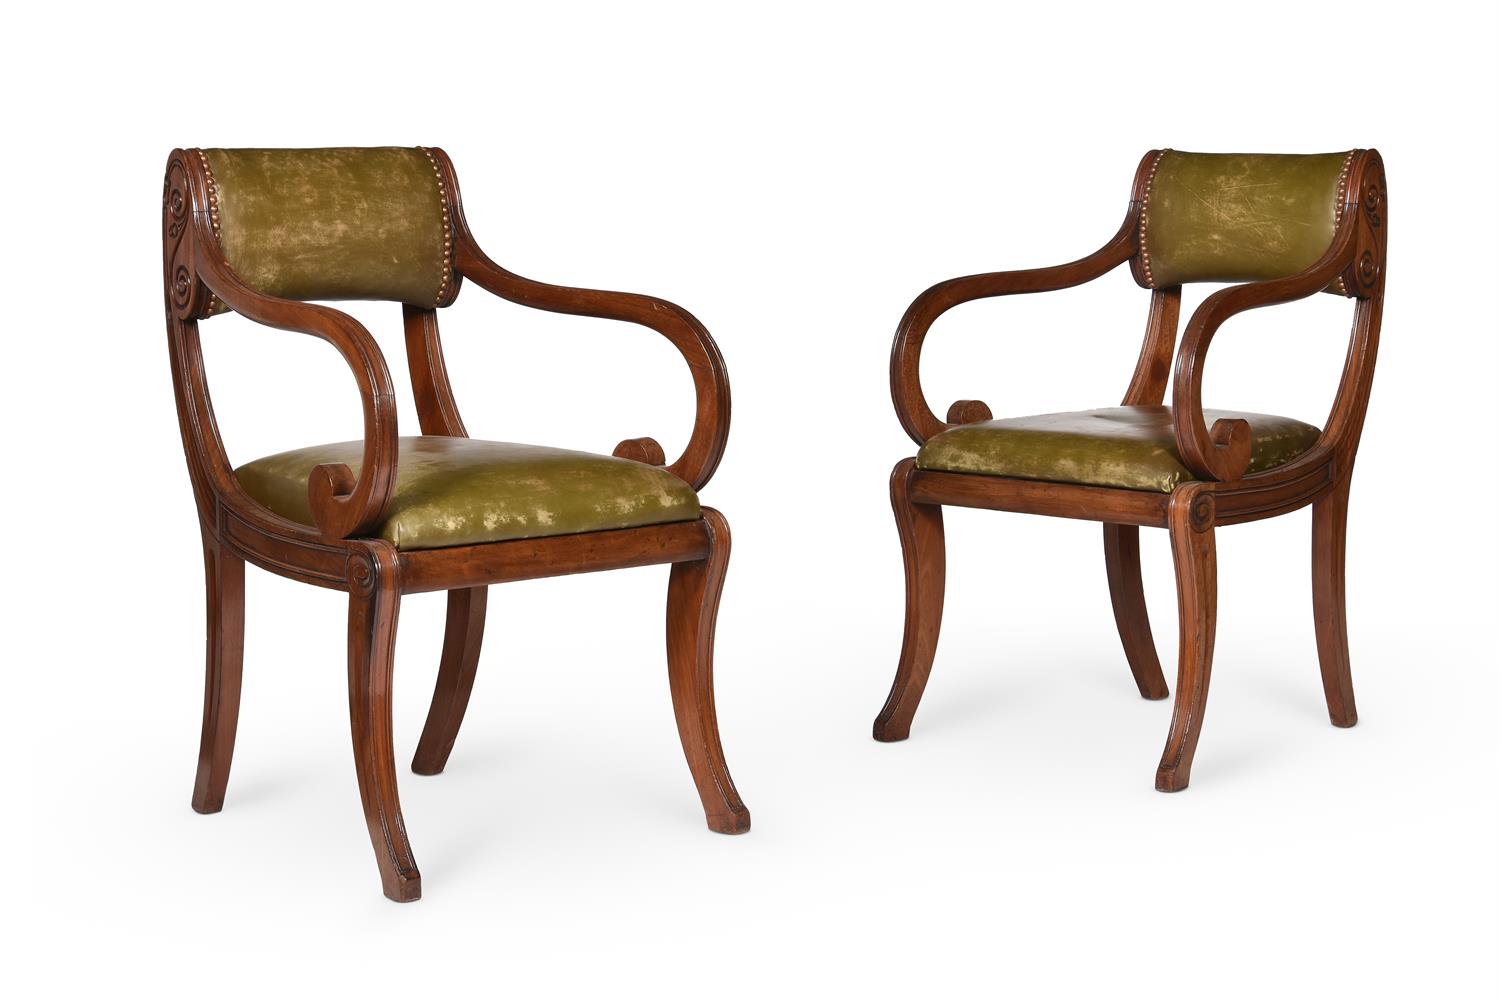 A PAIR OR REGENCY MAHOGANY AND LEATHER UPHOLSTERED OPEN ARMCHAIRS, POSSIBLY SCOTTISH, CIRCA 1820